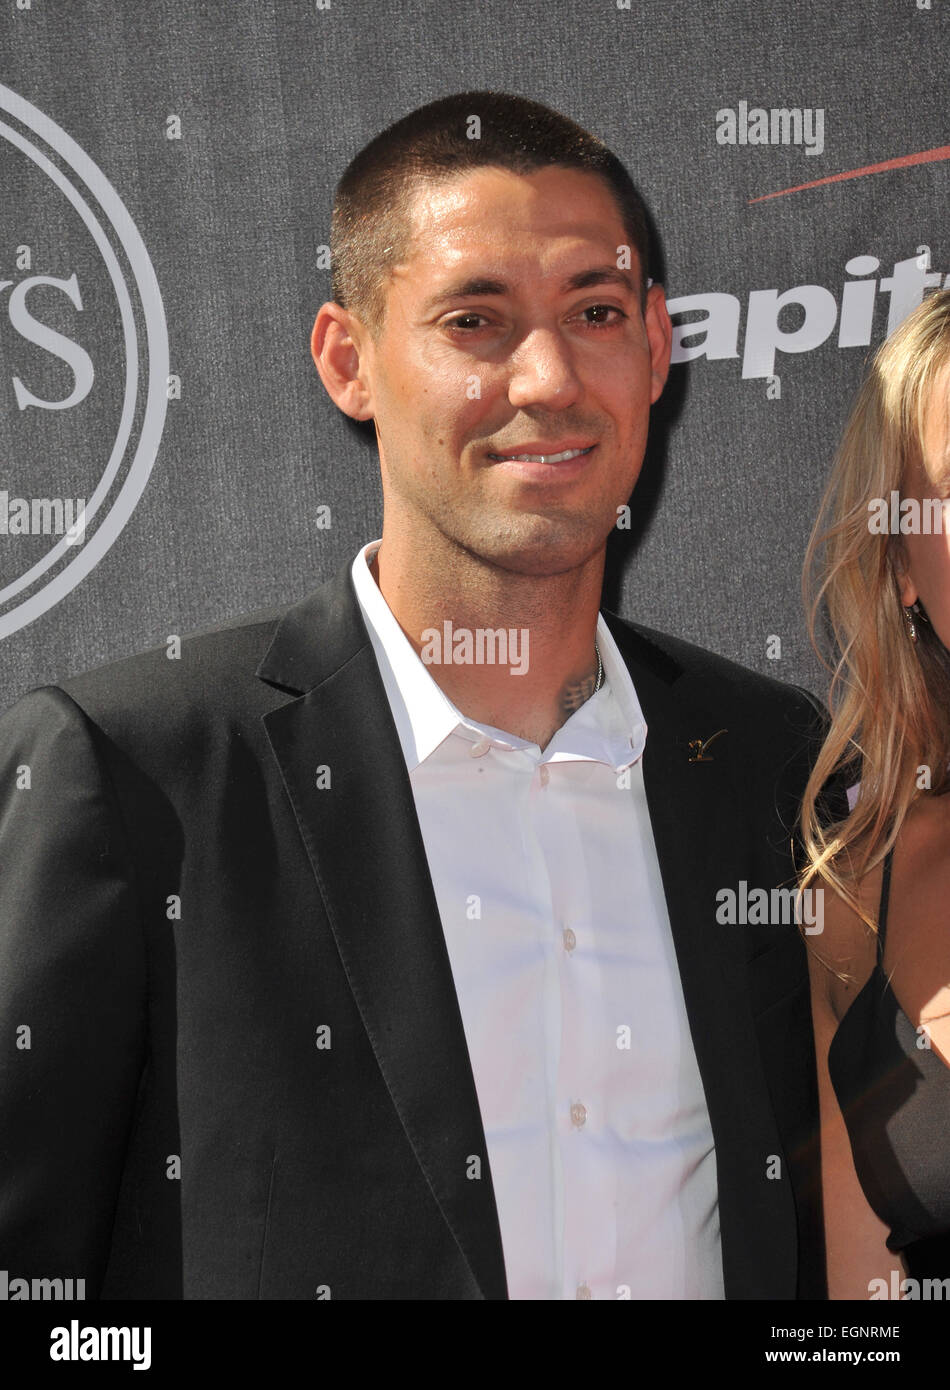 LOS ANGELES, CA - JULY 16, 2014: US soccer star Clint Dempsey at the 2014 ESPY Awards at the Nokia Theatre LA Live. Stock Photo